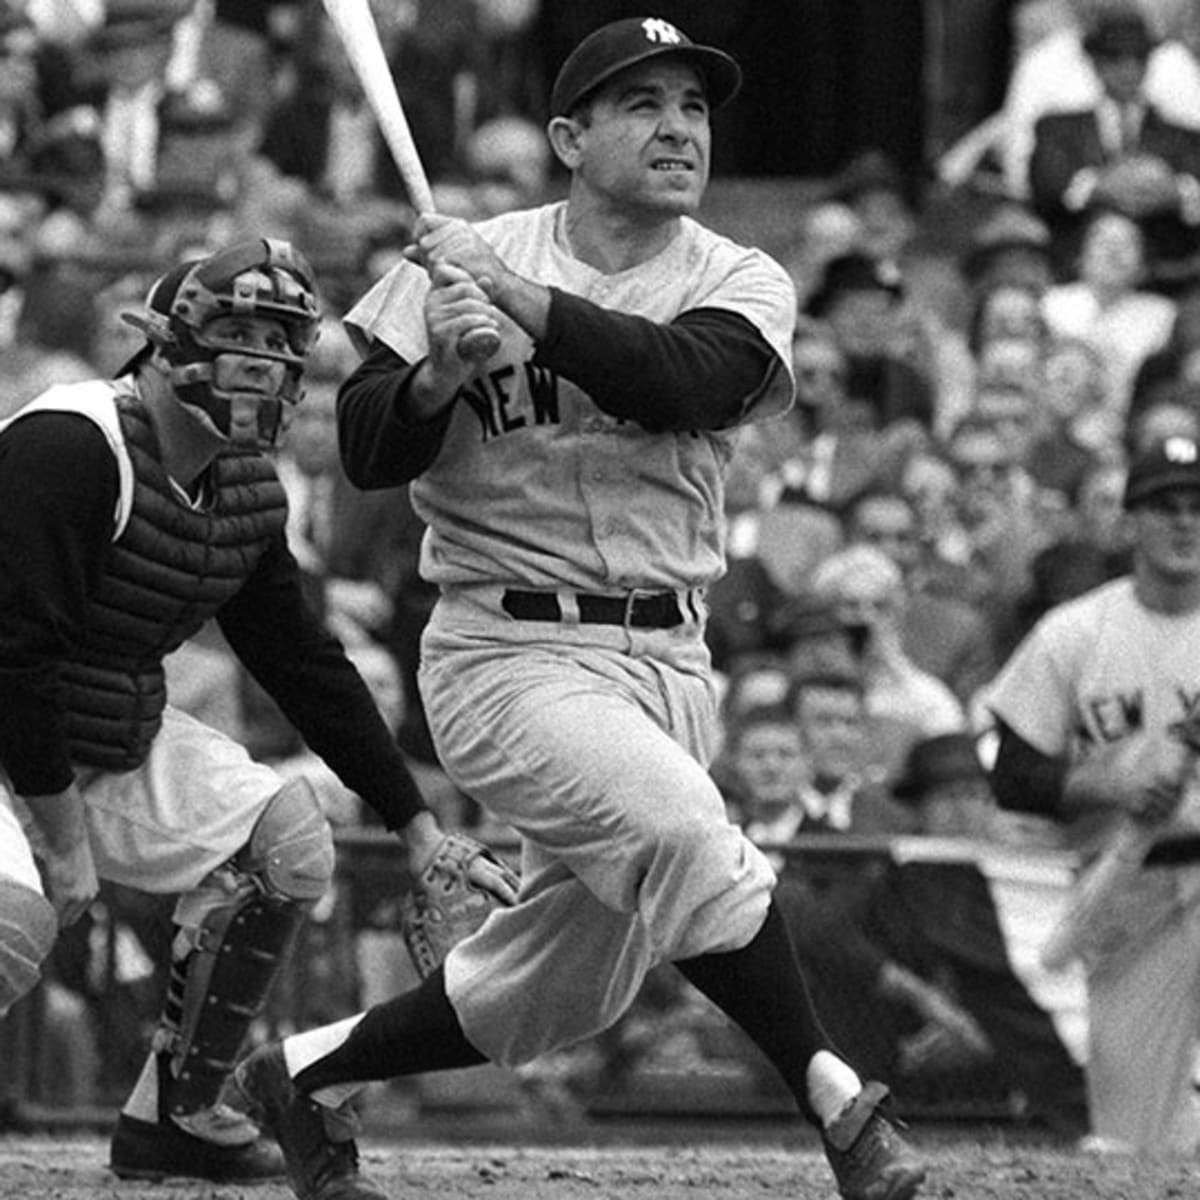 Yogi Berra embodied catching: overlooked and undervalued – Daily News